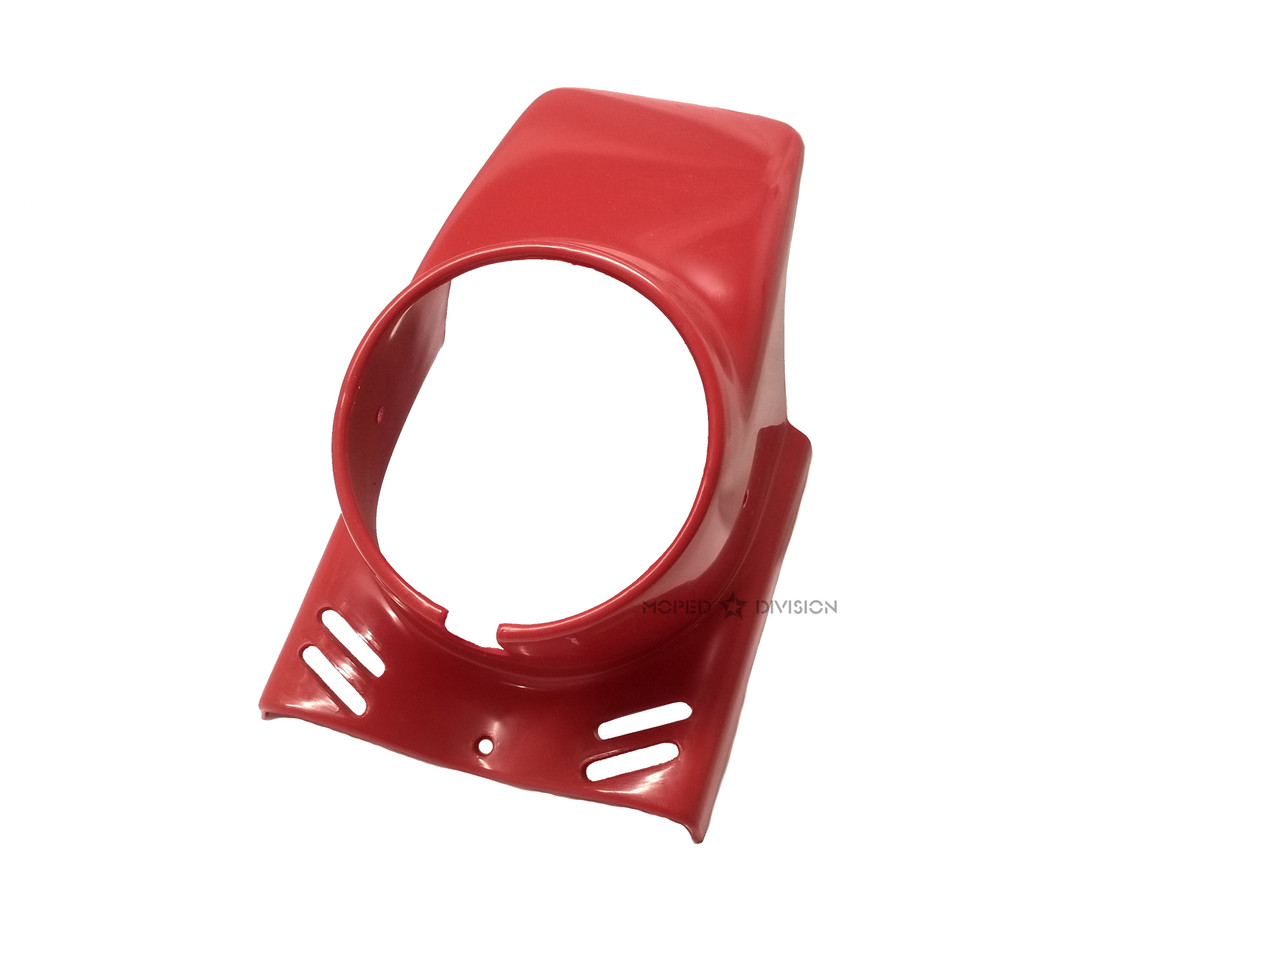 Puch Macho  Round Headlight Moped Fairing - Red